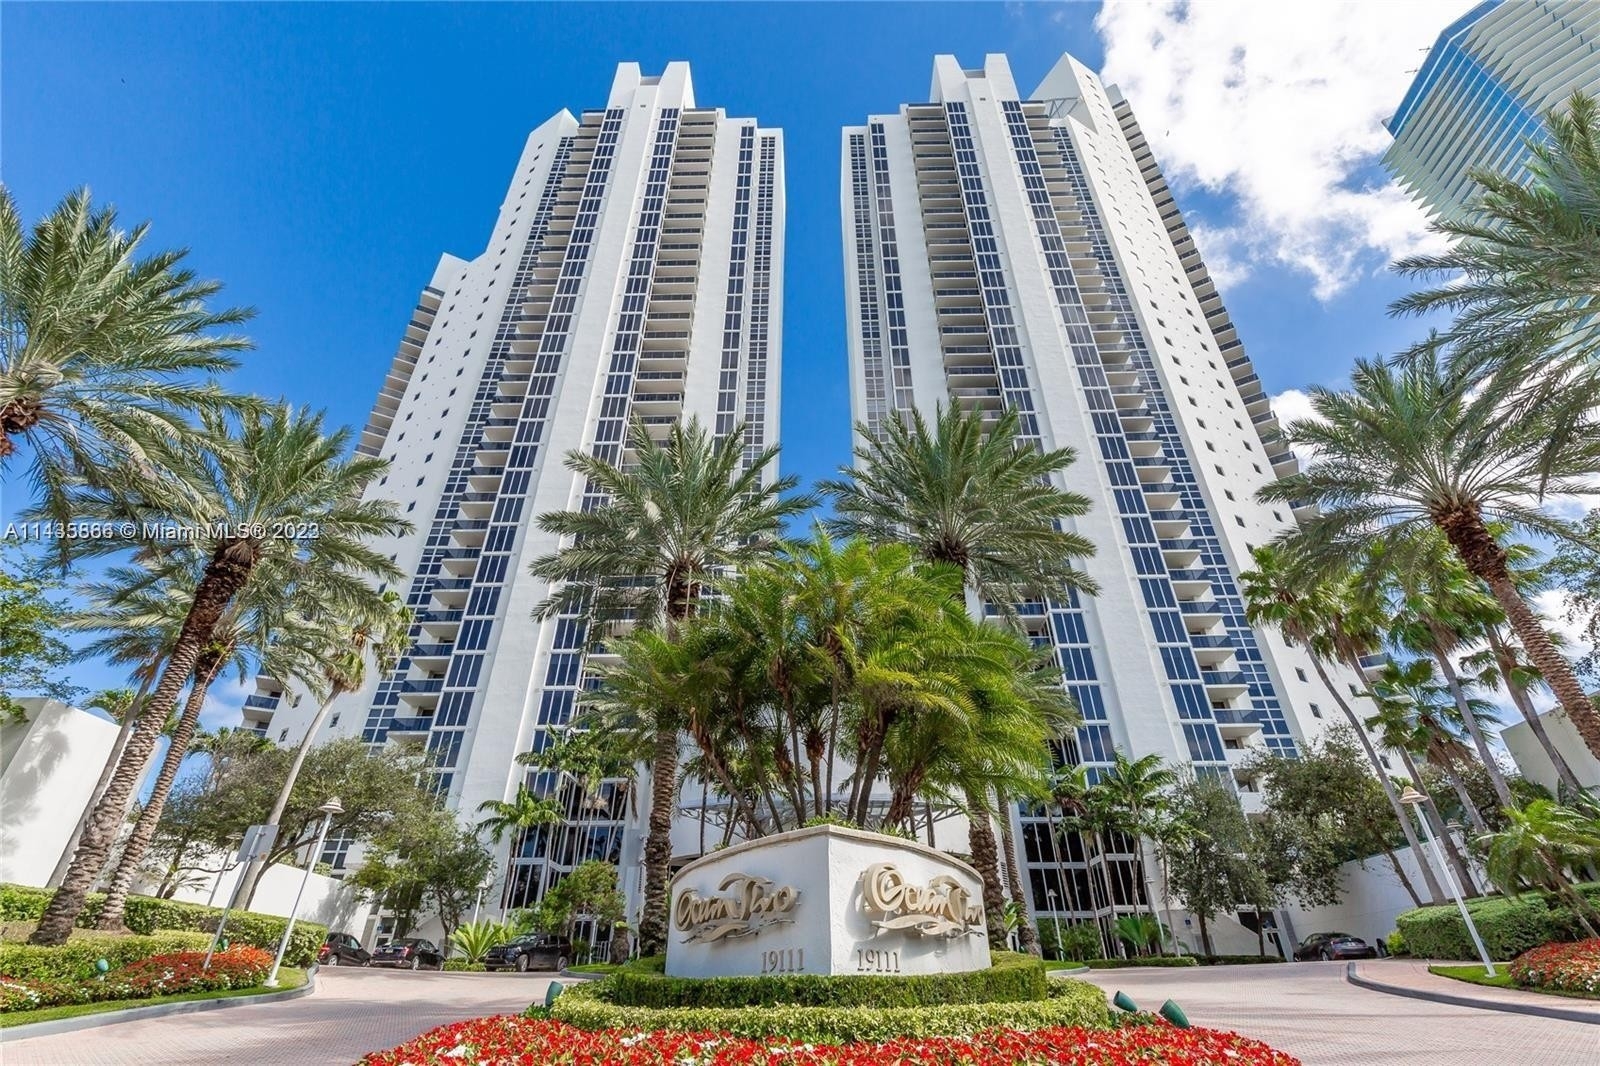 16. Condominiums for Sale at 19111 Collins Ave, 201 North Biscayne Beach, Sunny Isles Beach, FL 33160